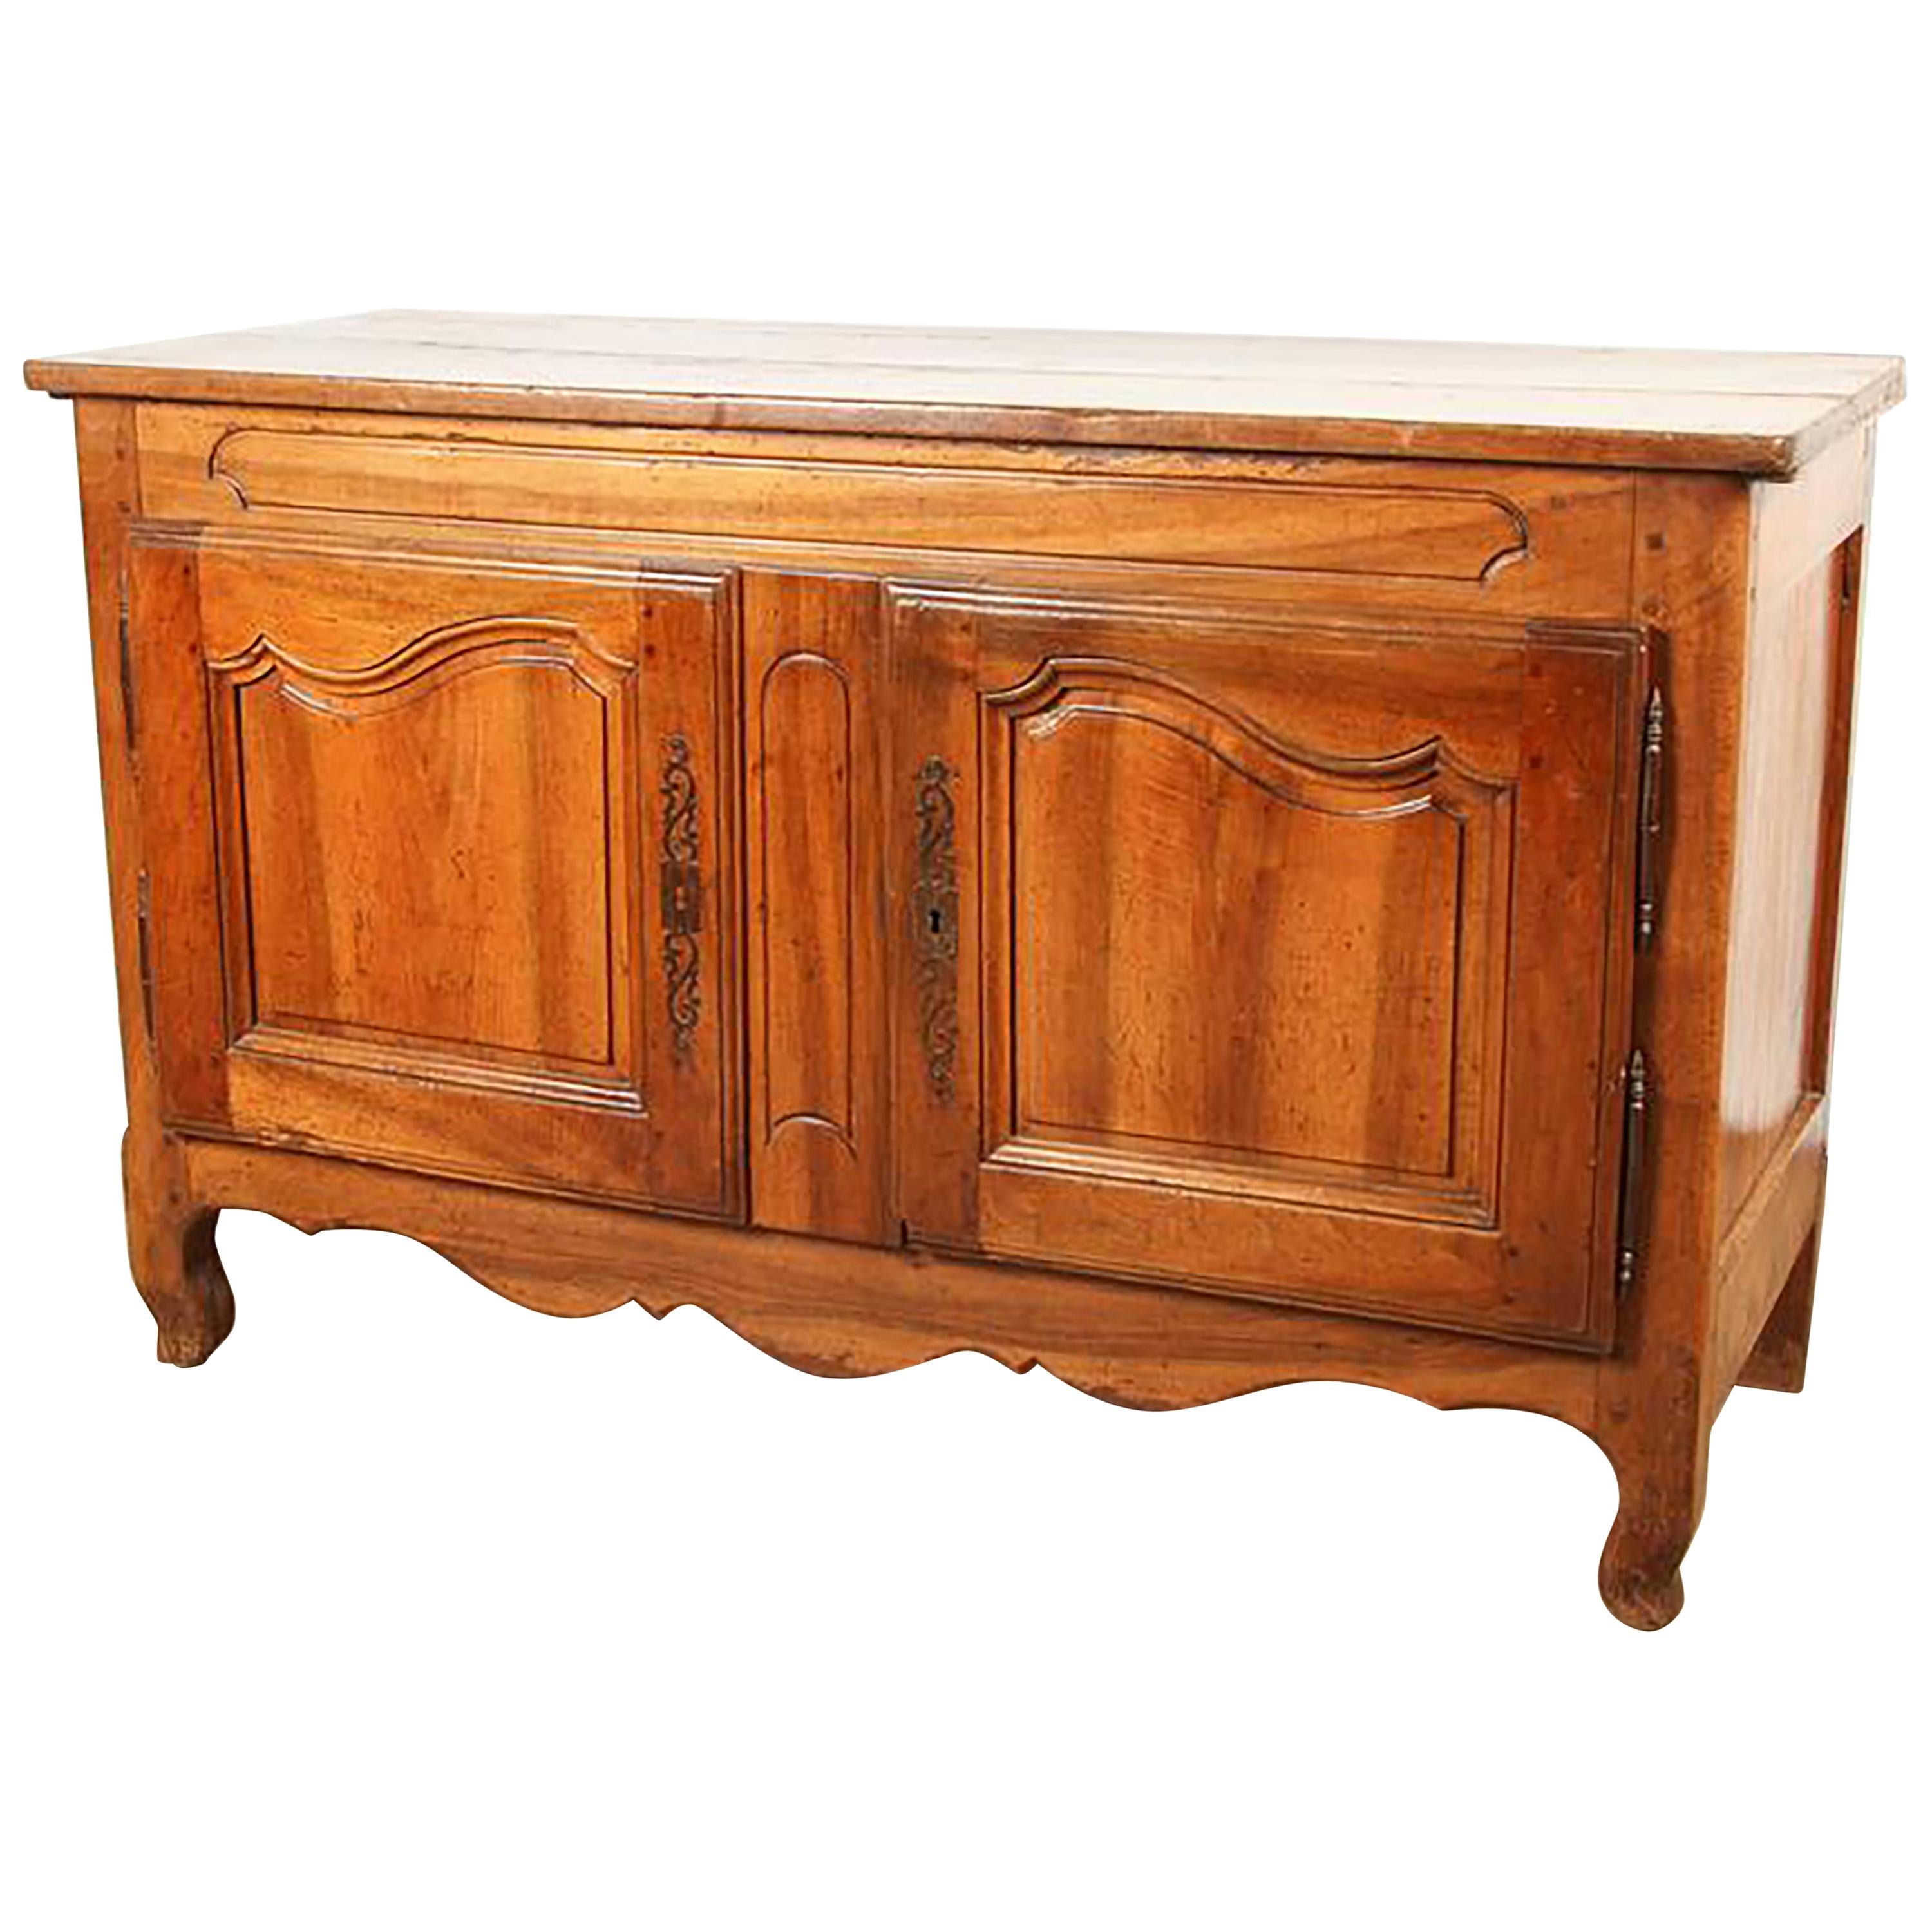 18th Century French Baroque Provincial Sideboard